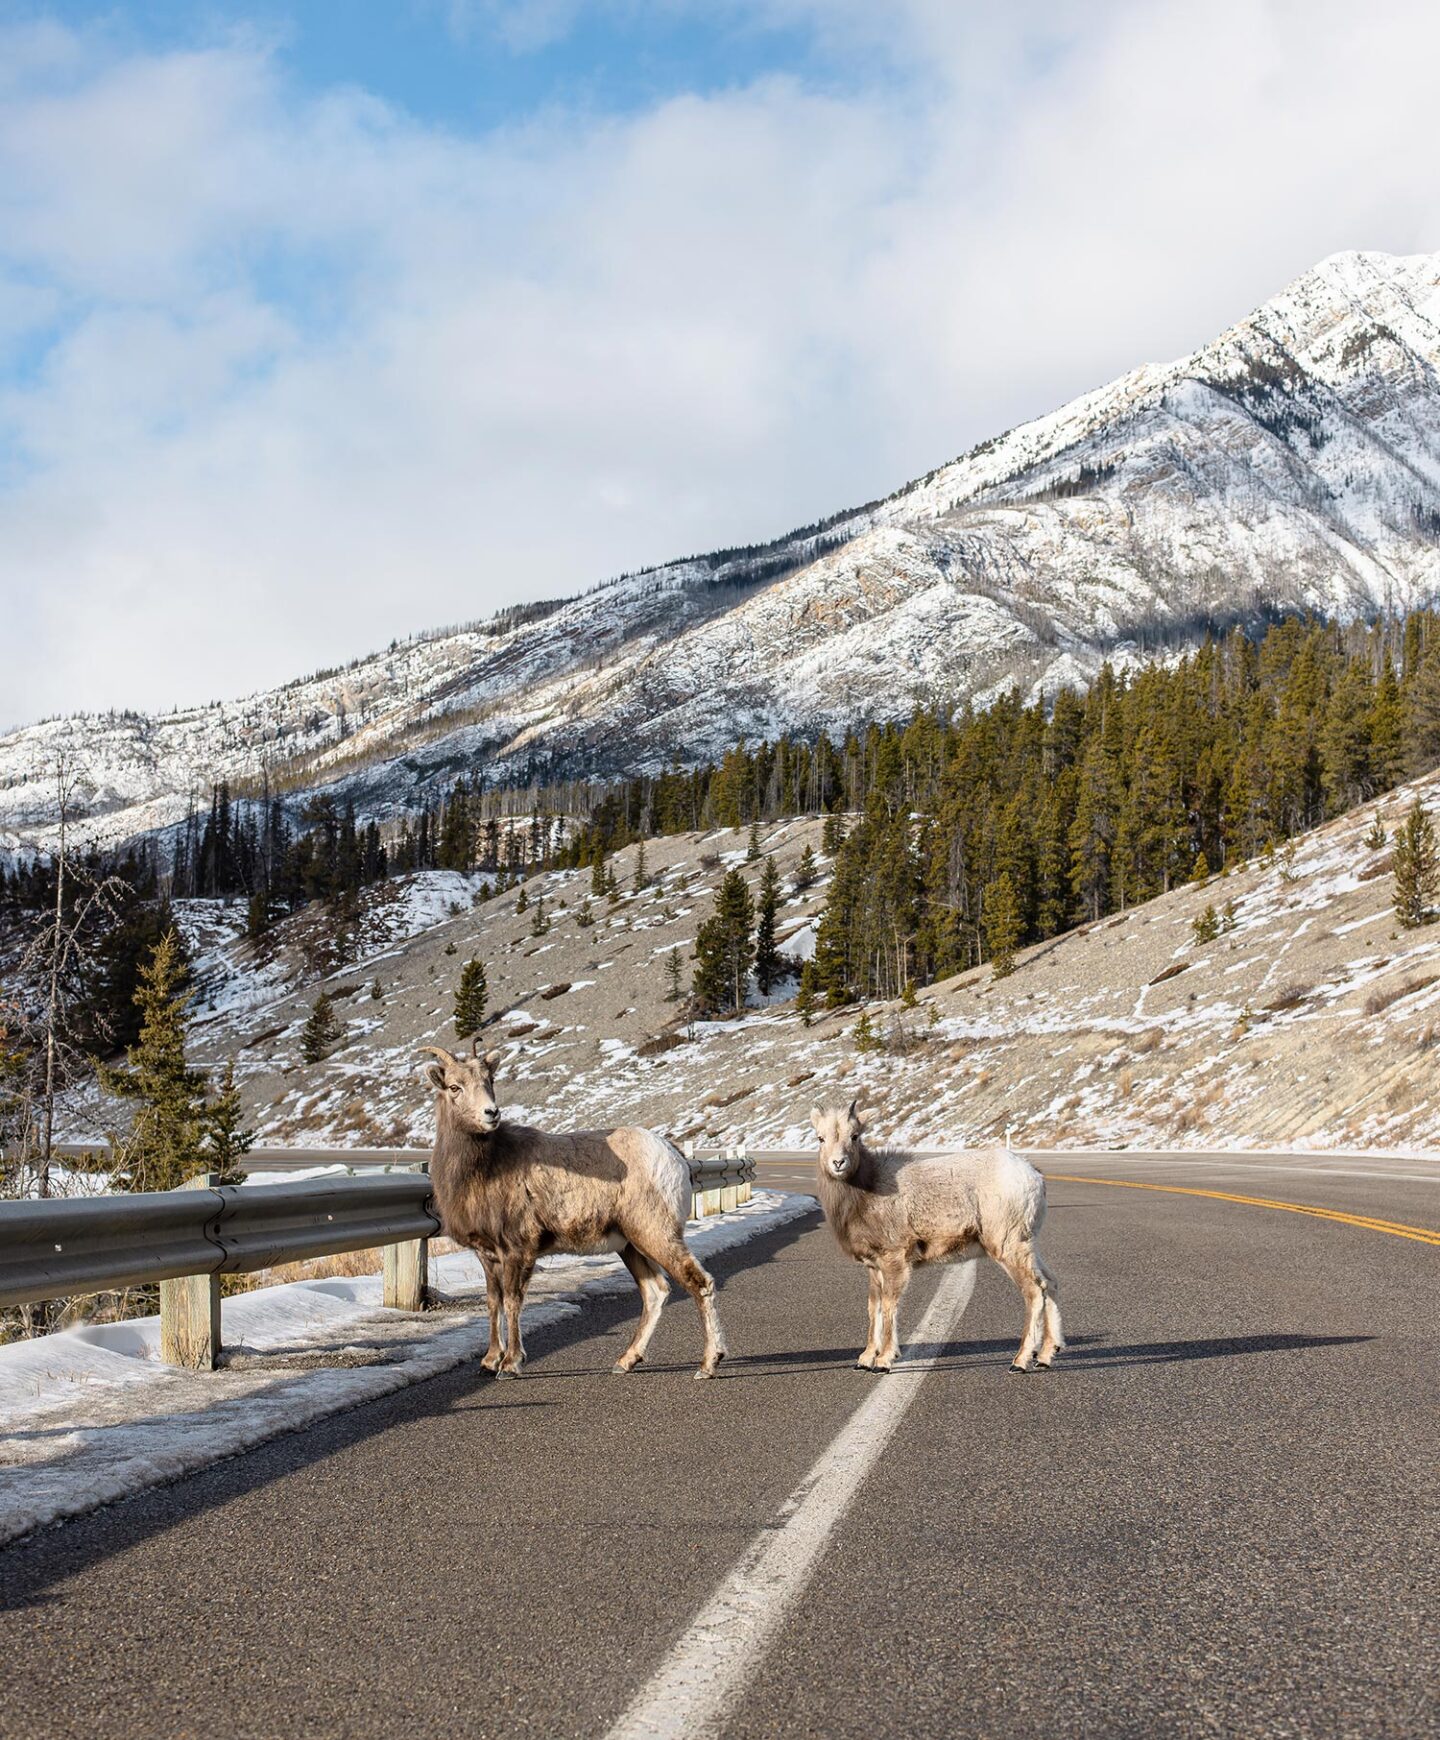 A mother and baby bighorn sheep standing in the middle of a road,  snow capped mountains and pine trees can be seen in background